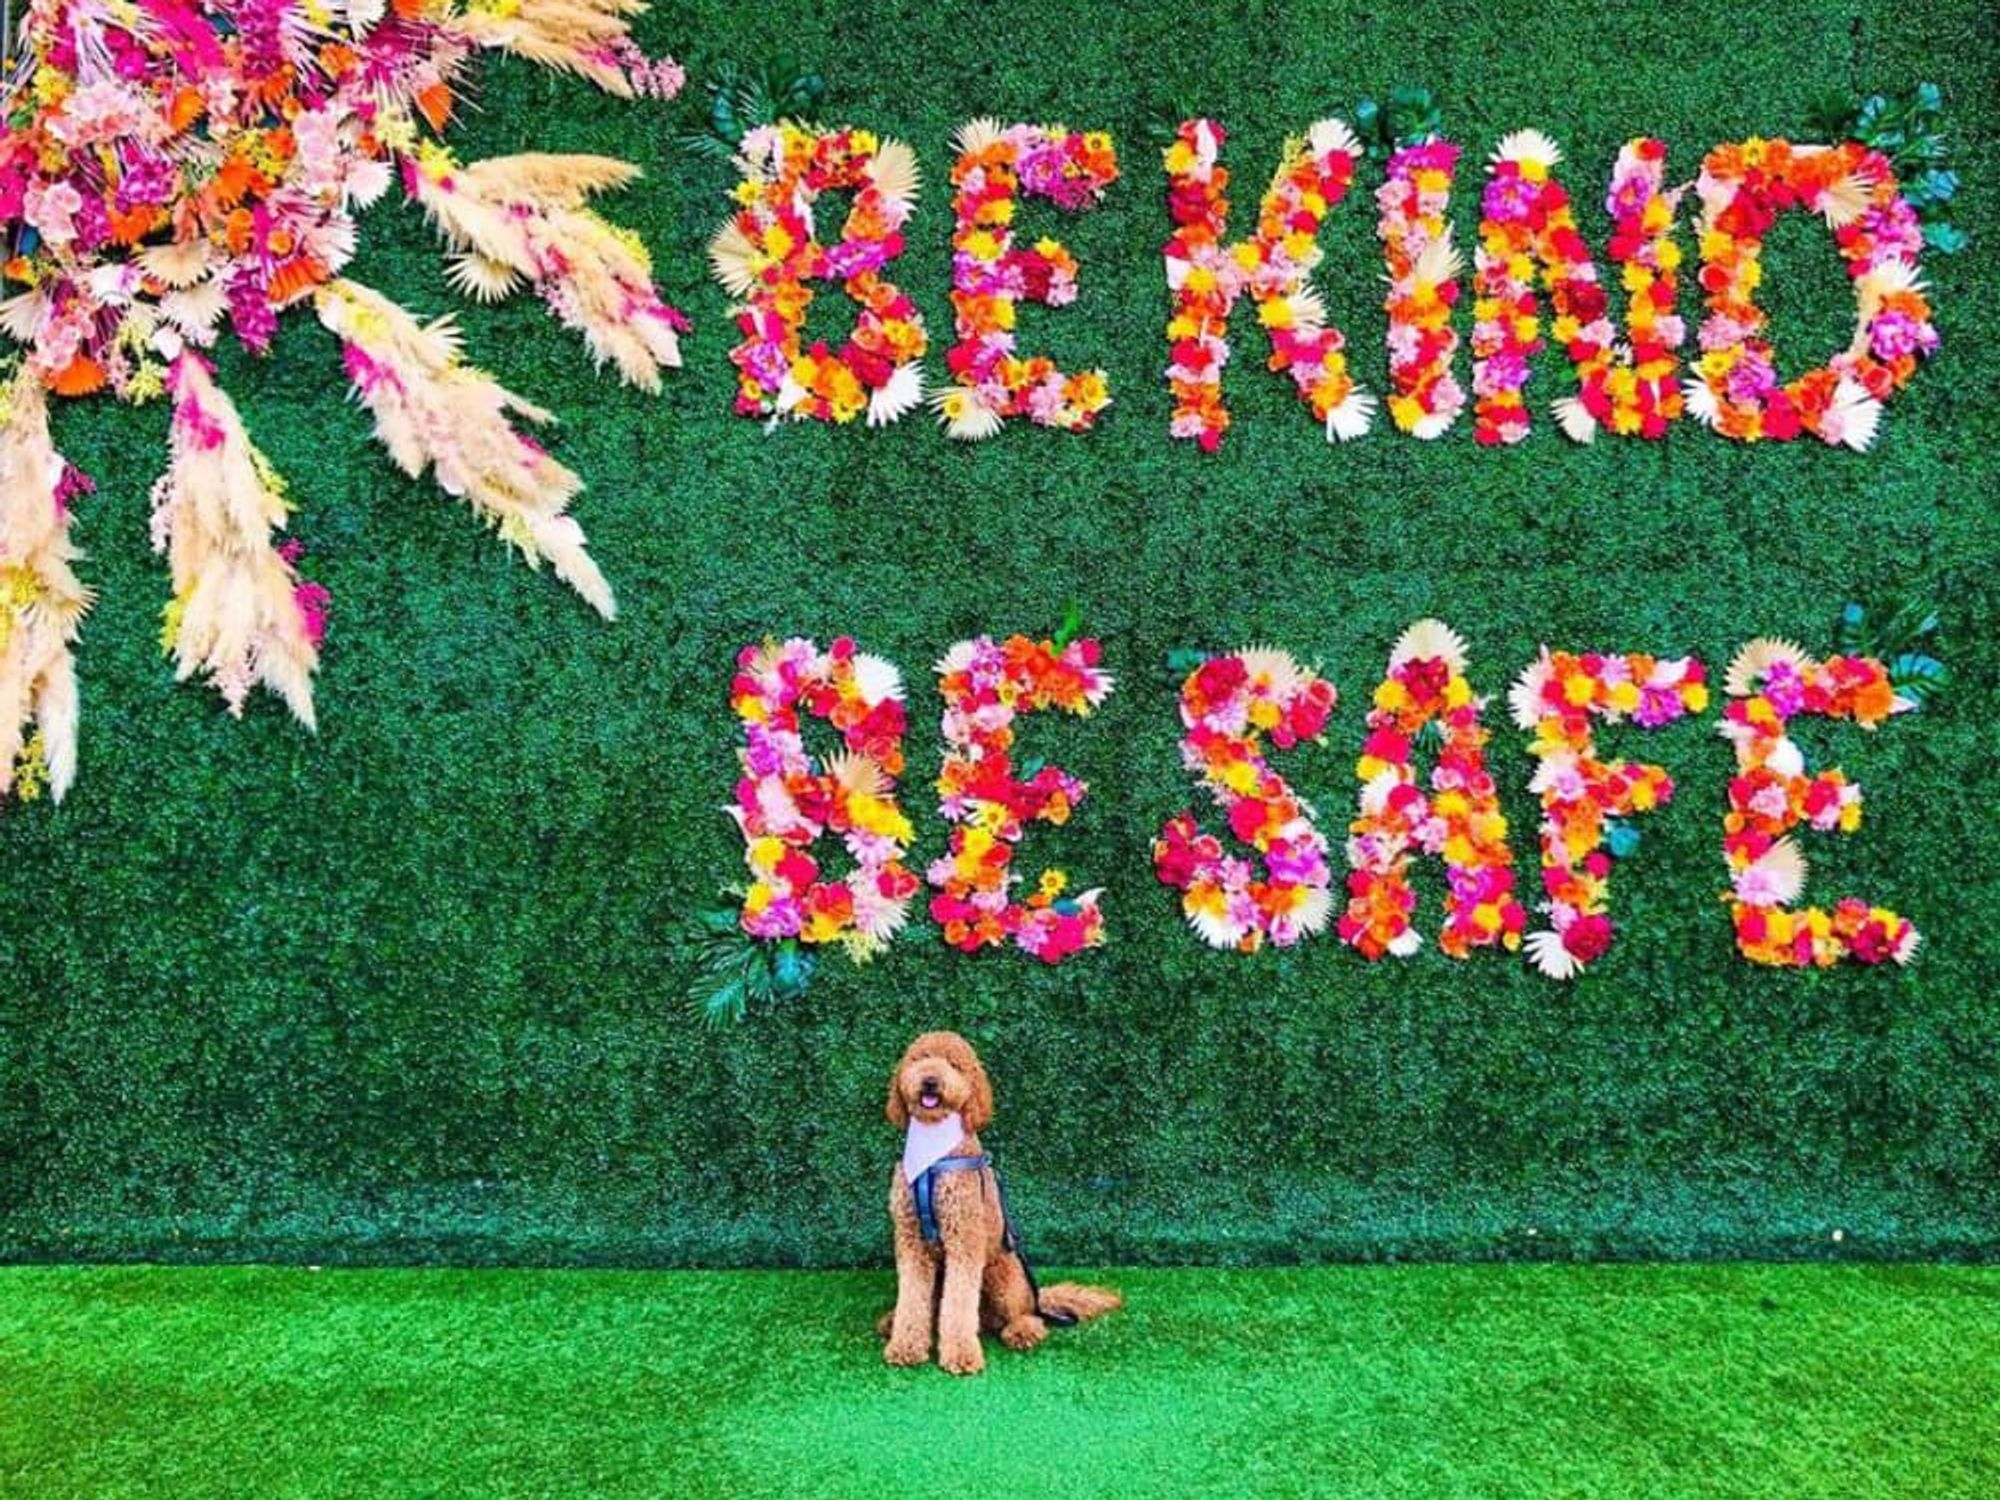 Dog in front of "be kind be safe" floral wall in Plano